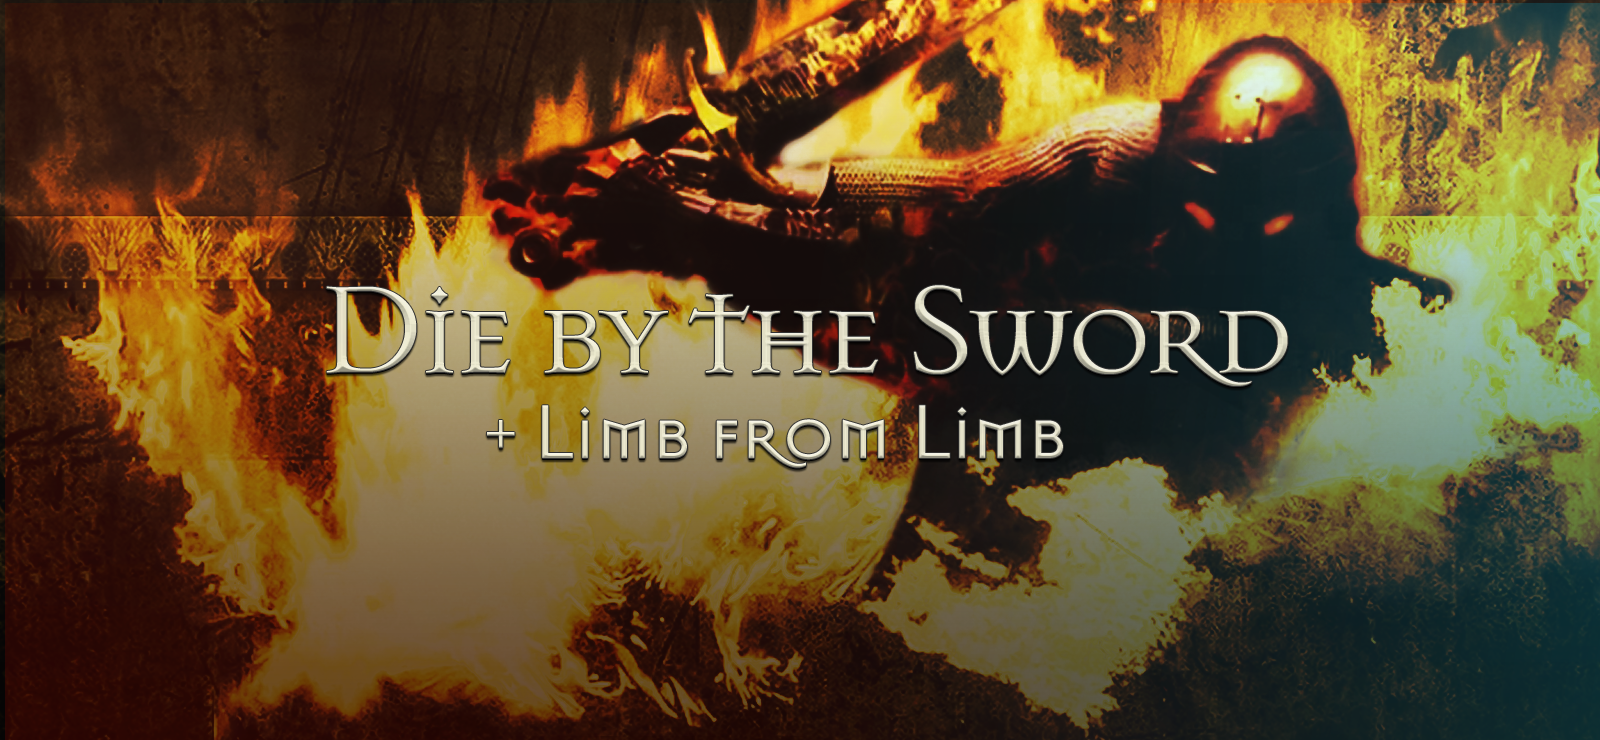 Die By The Sword + Limb From Limb